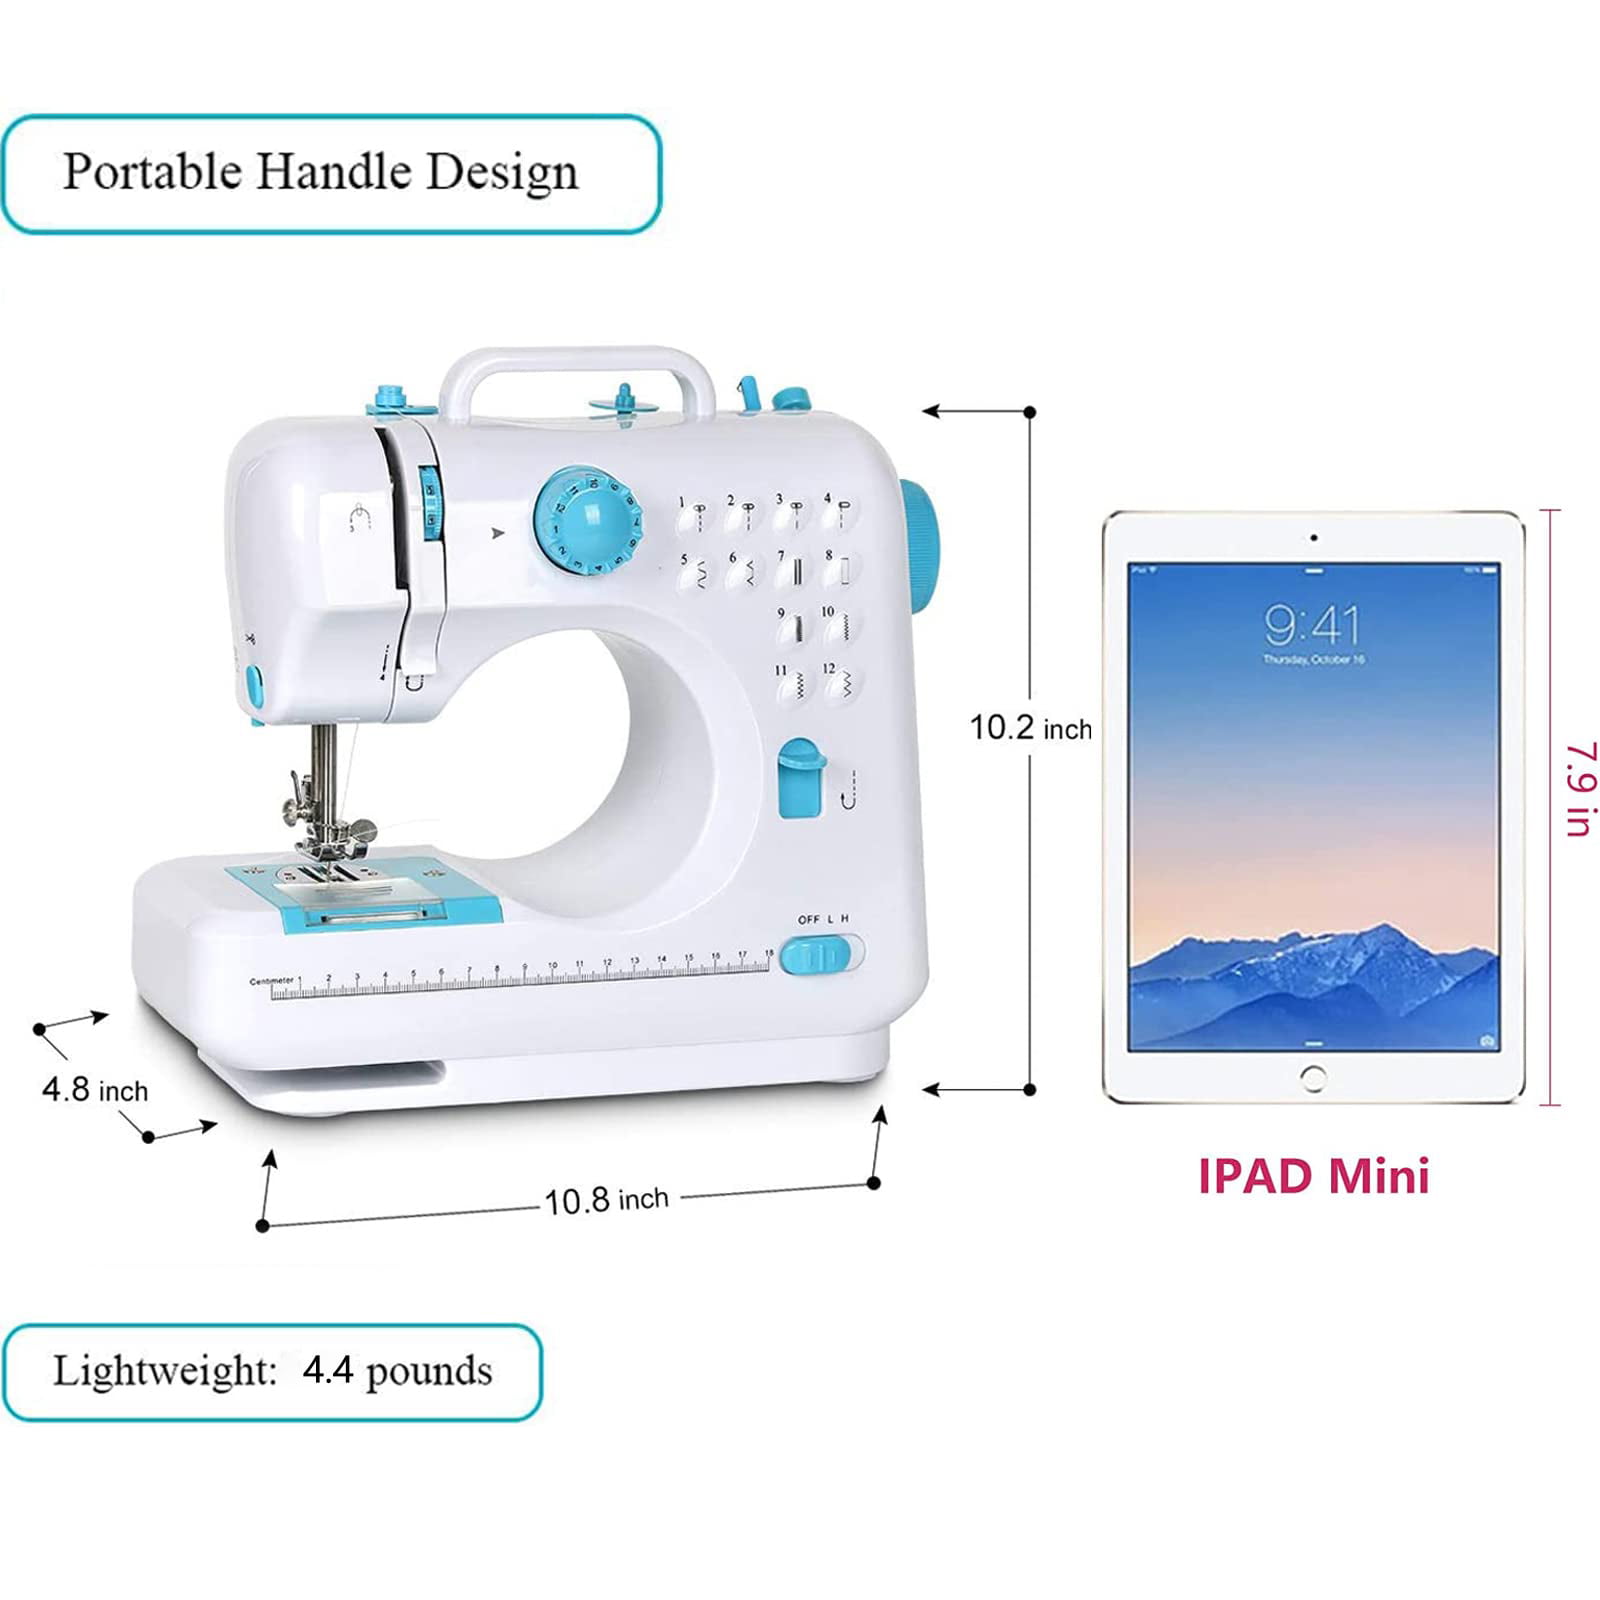 12 Built-in Stitches Small Sewing Machine Double Threads and Two Speed  Multi-function Mending Machine with Foot Pedal for Kids - Bed Bath & Beyond  - 37383688